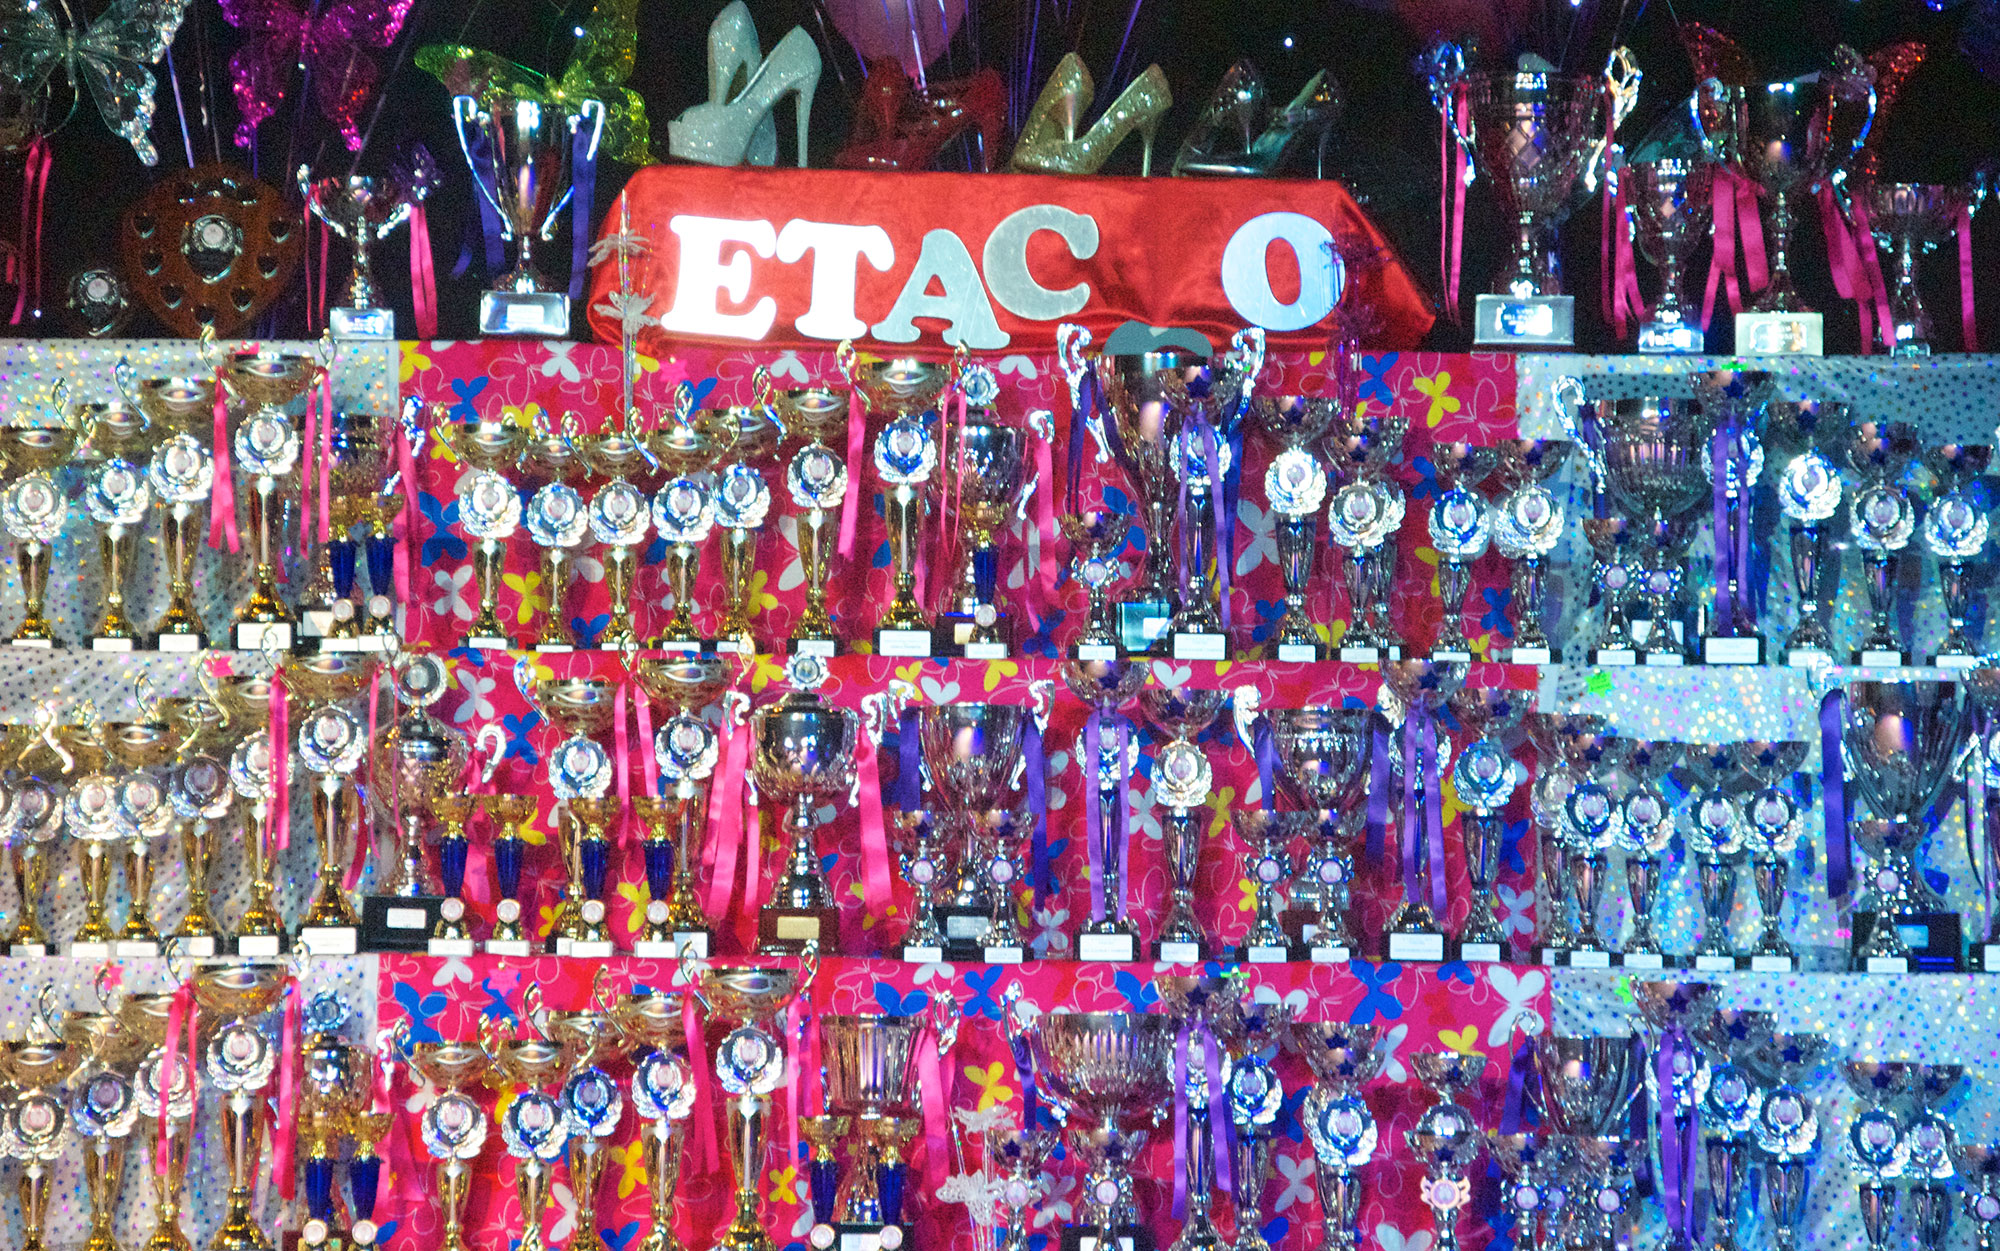 Trophies on display at ETACCO End of Season championships © 2013 L Wright